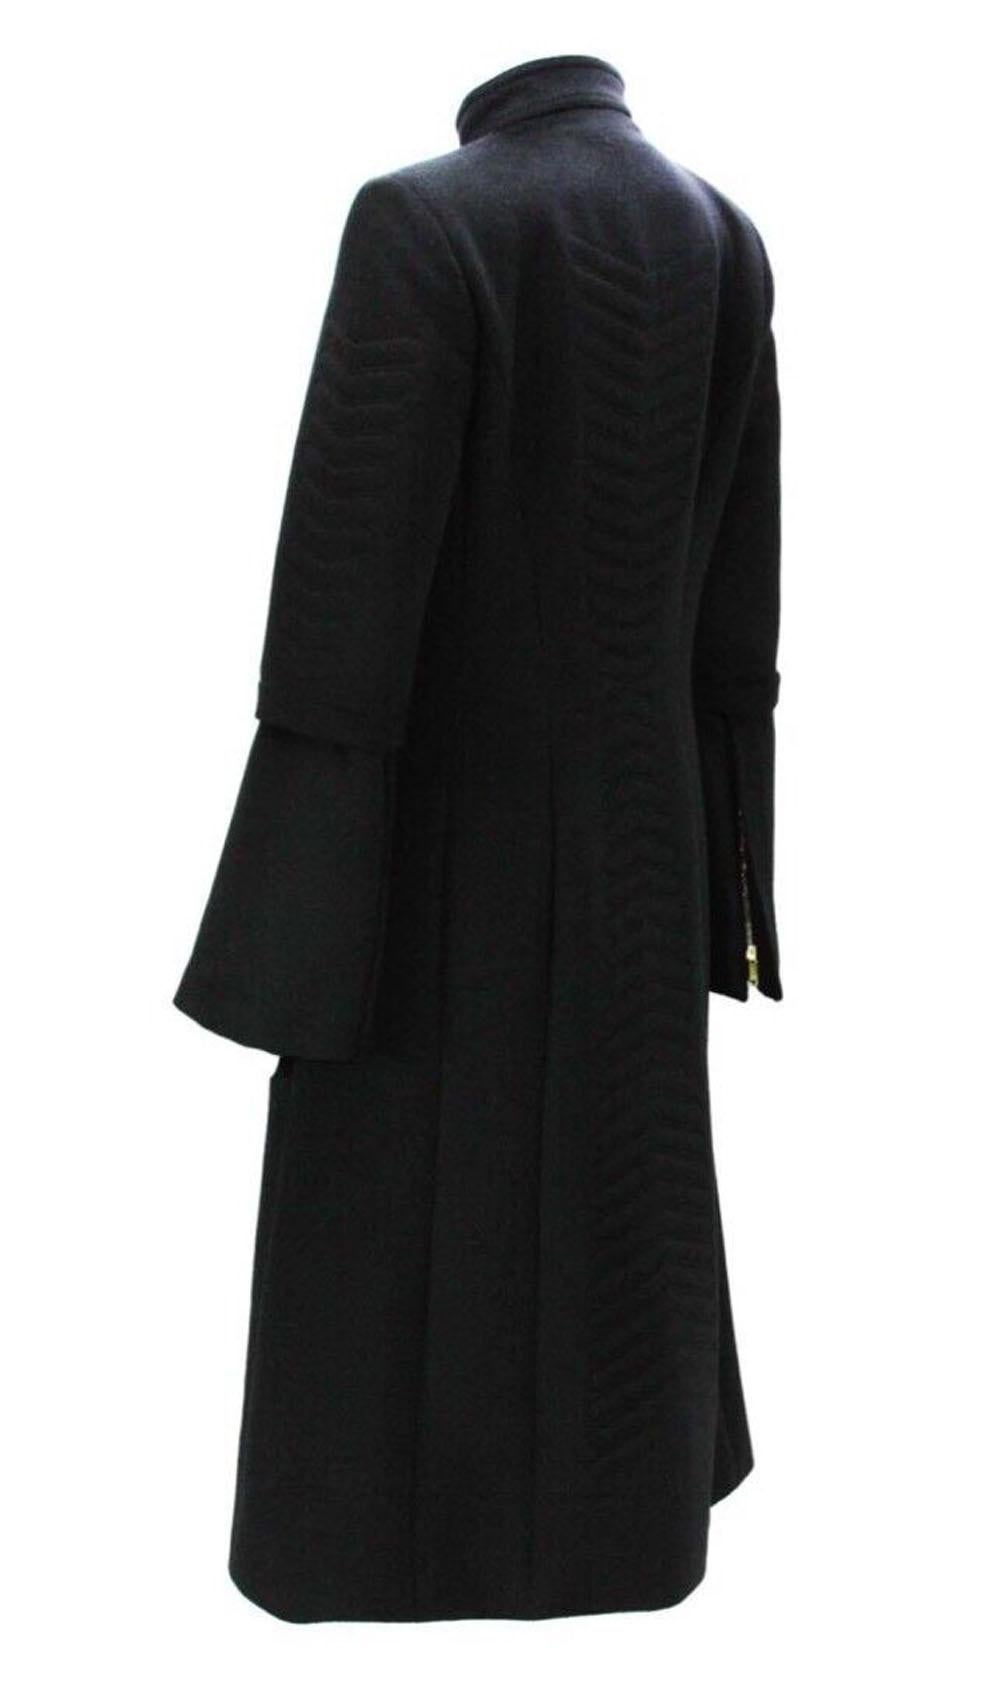 Tom Ford for Gucci F/W 2004 Black Angora Wool Chevron Pattern Coat with Belt  42 For Sale 2